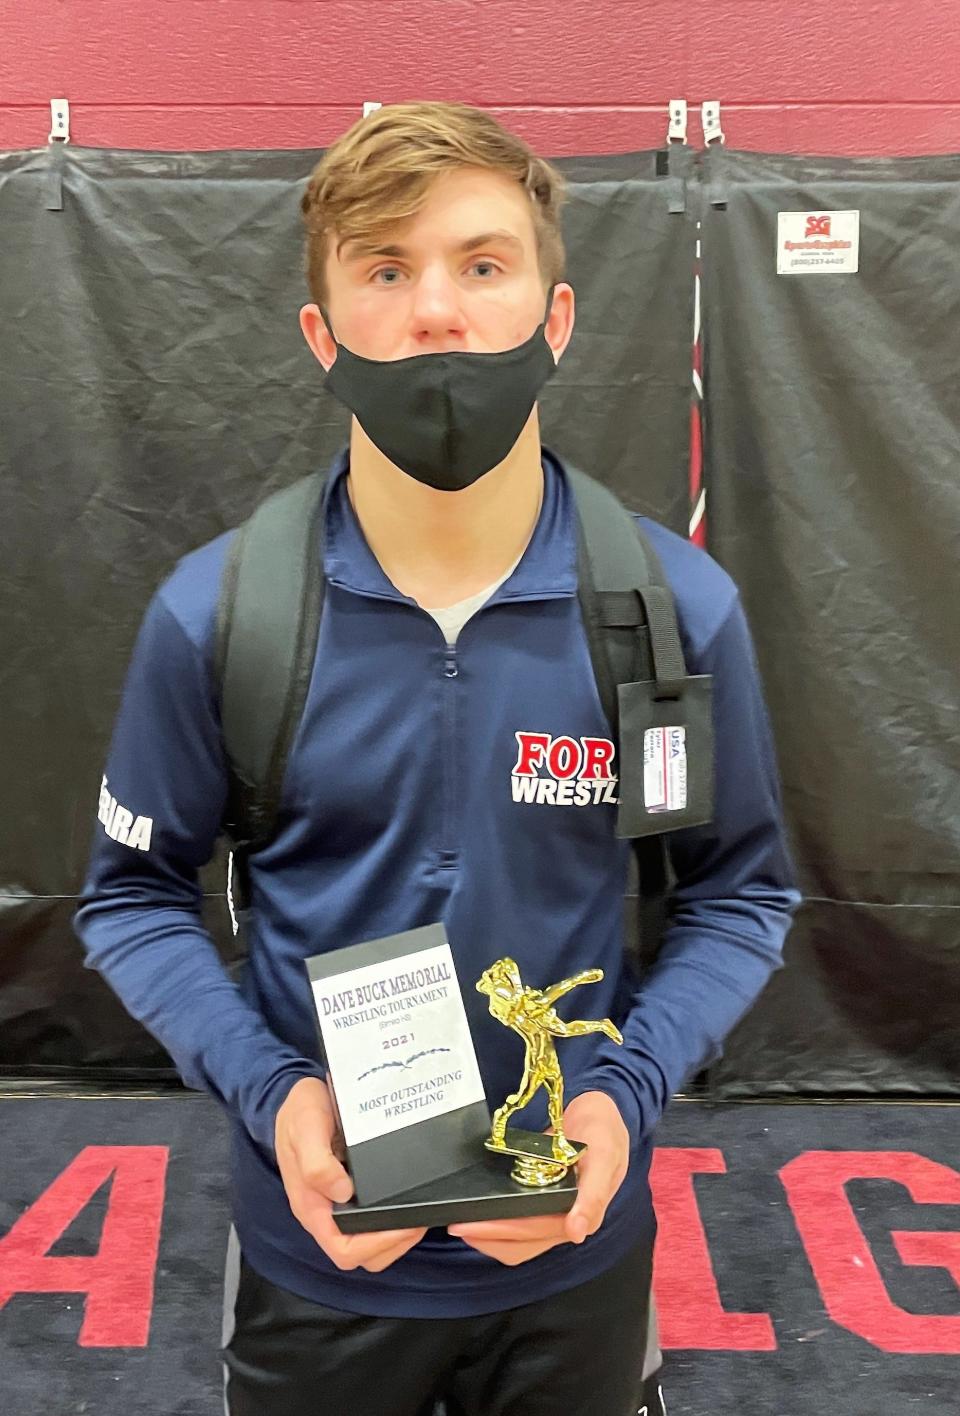 Tyler Ferrara was named Most Outstanding Wrestler at the Dave Buck Memorial Wrestling Tournament after finishing first in the 126-pound weight class Dec. 11, 2021 at Elmira High School.